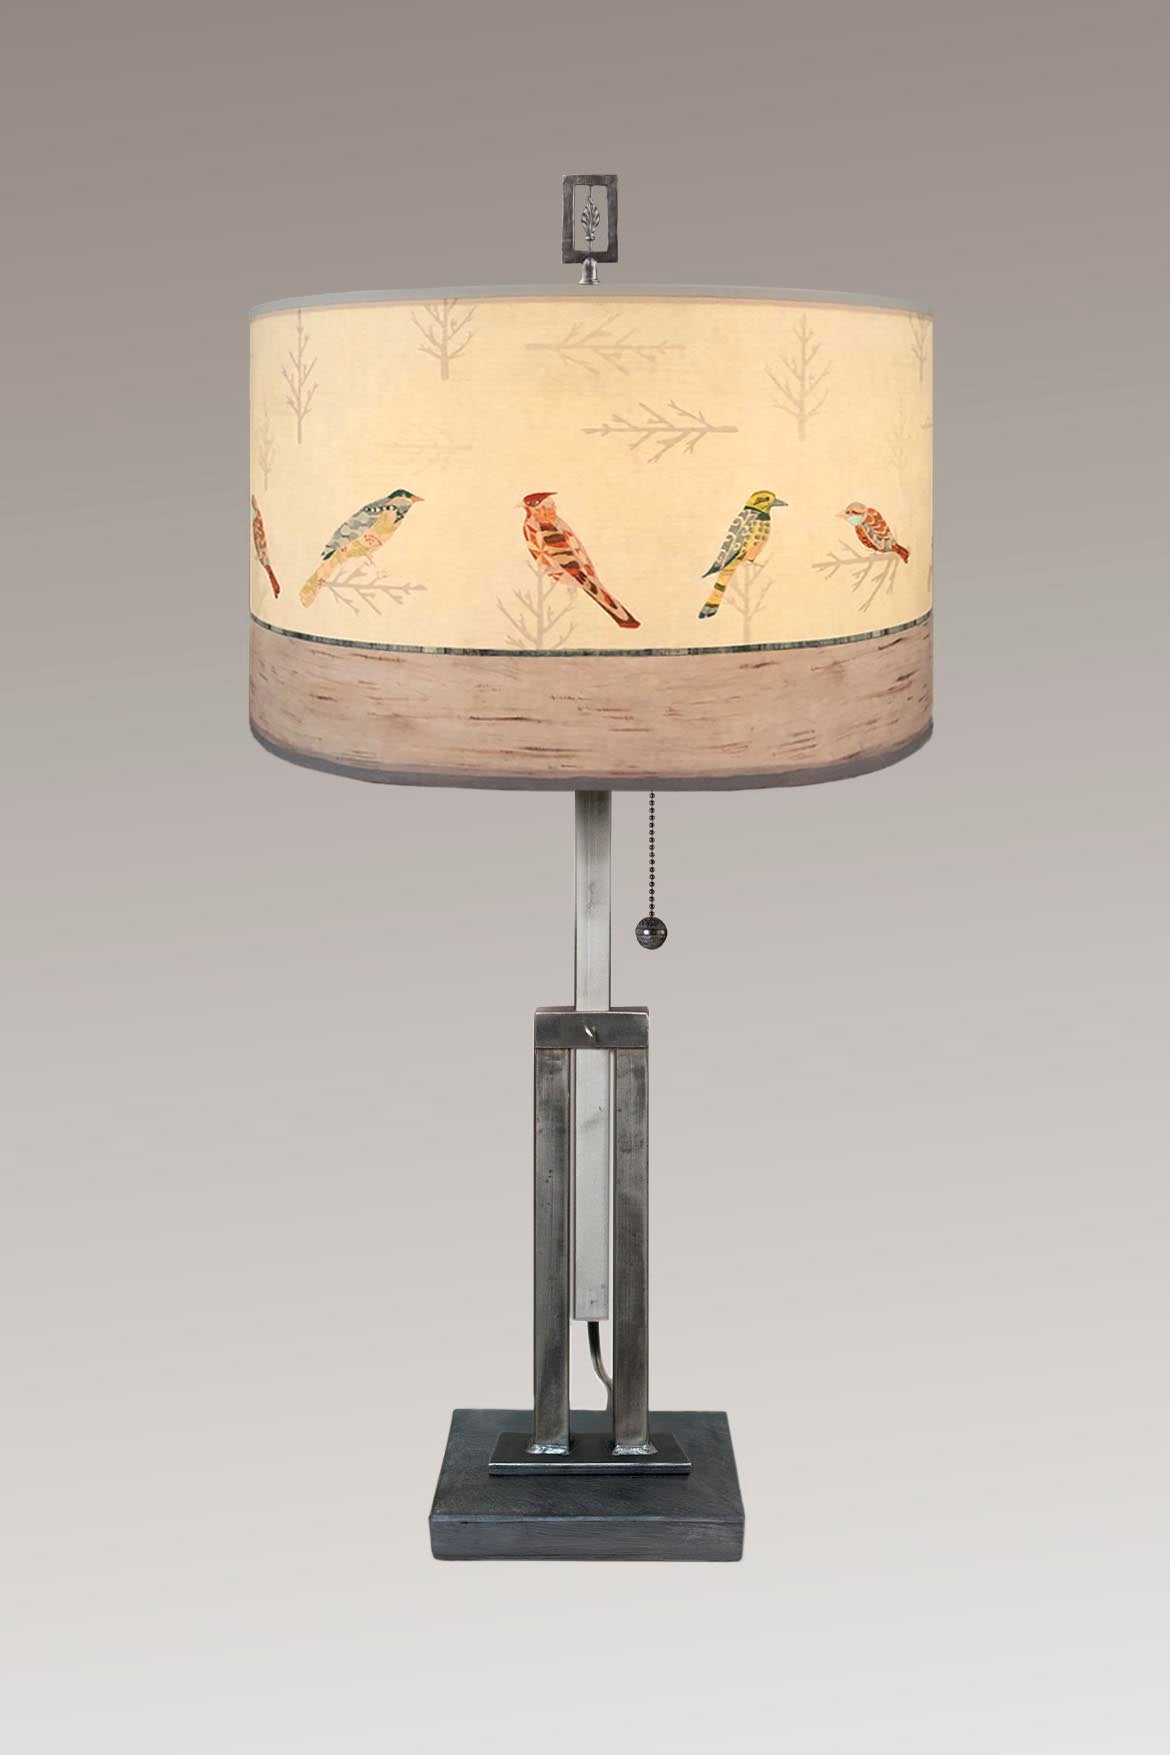 Janna Ugone & Co Table Lamps Adjustable-Height Steel Table Lamp with Large Drum Shade in Bird Friends